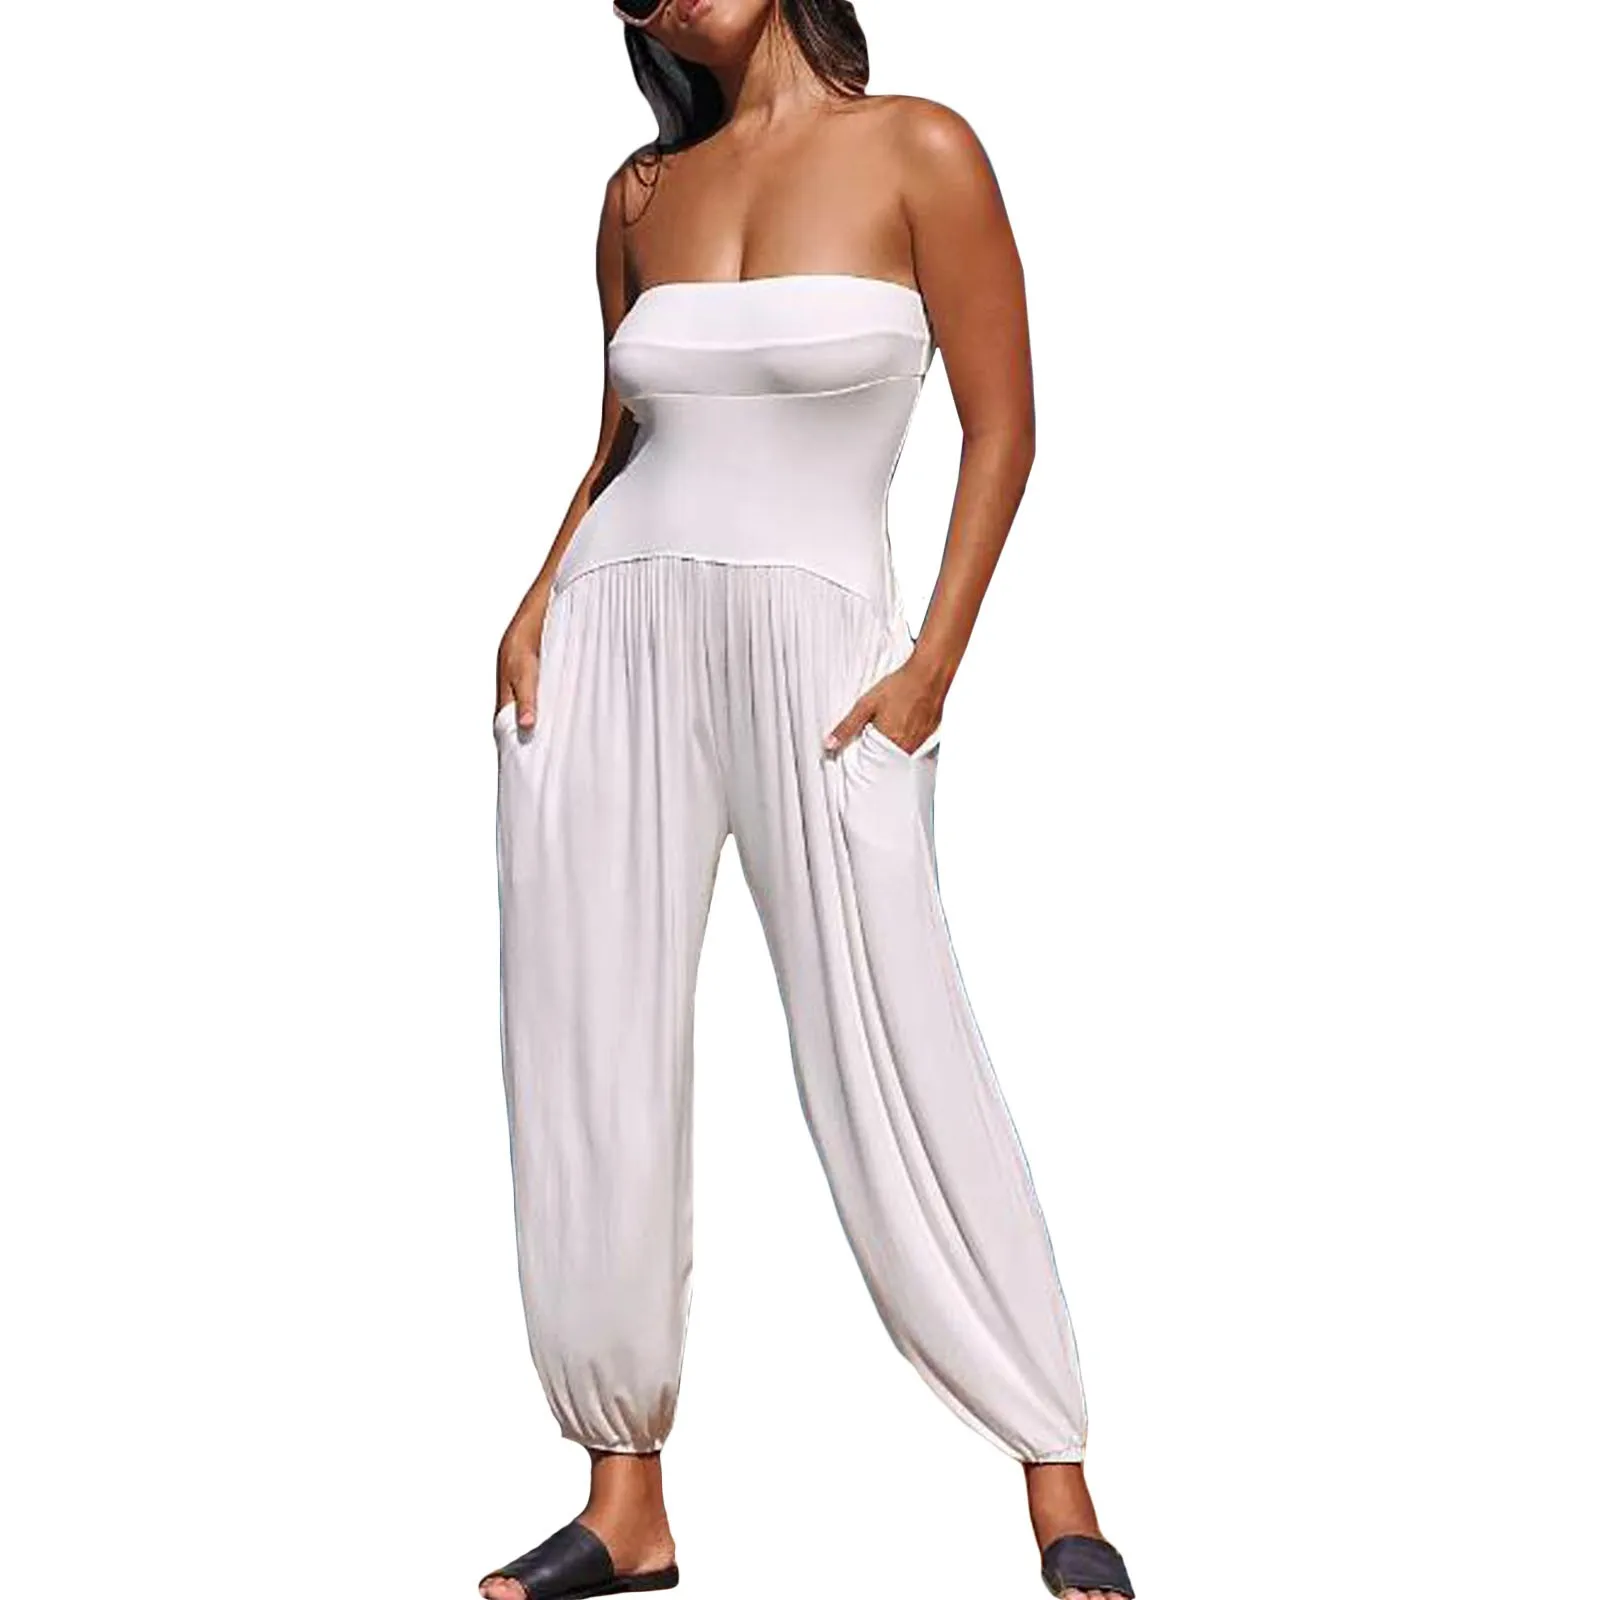 

Womens Overalls Casual Wide Leg Jumpsuits Rompers Sleeveless With Pockets Outfits calça feminina pantalones de mujer السراويل